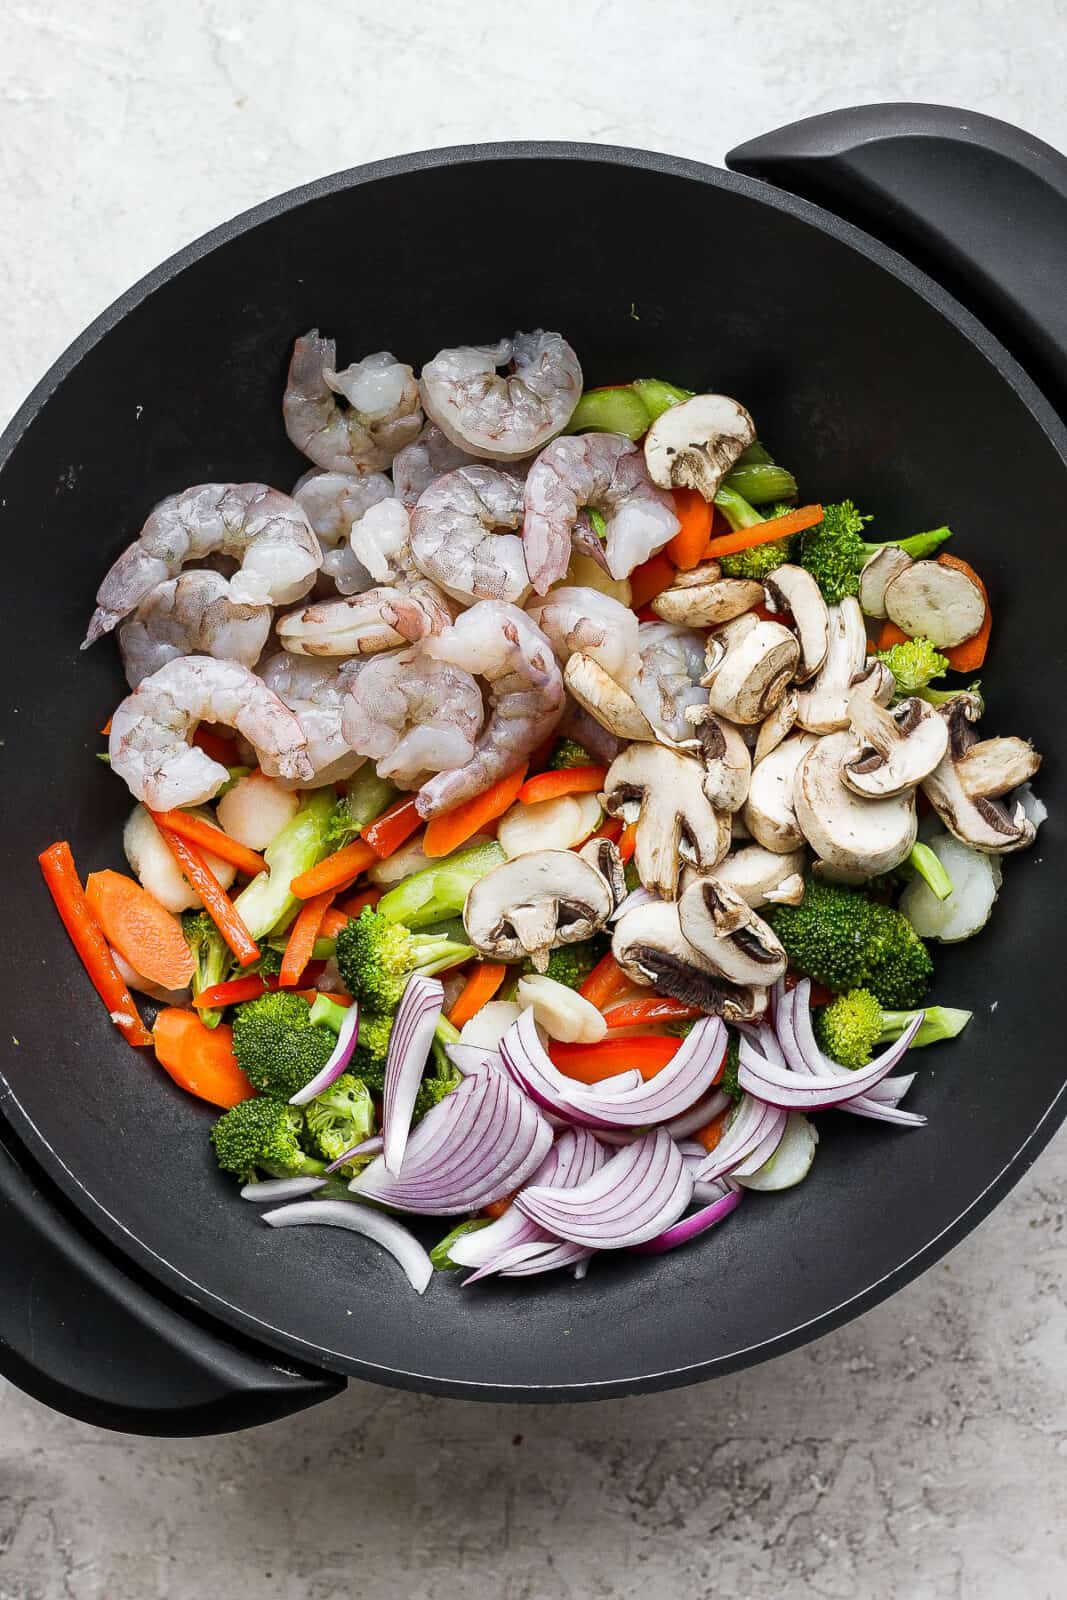 The wok with shrimp, red onion, and mushrooms added.